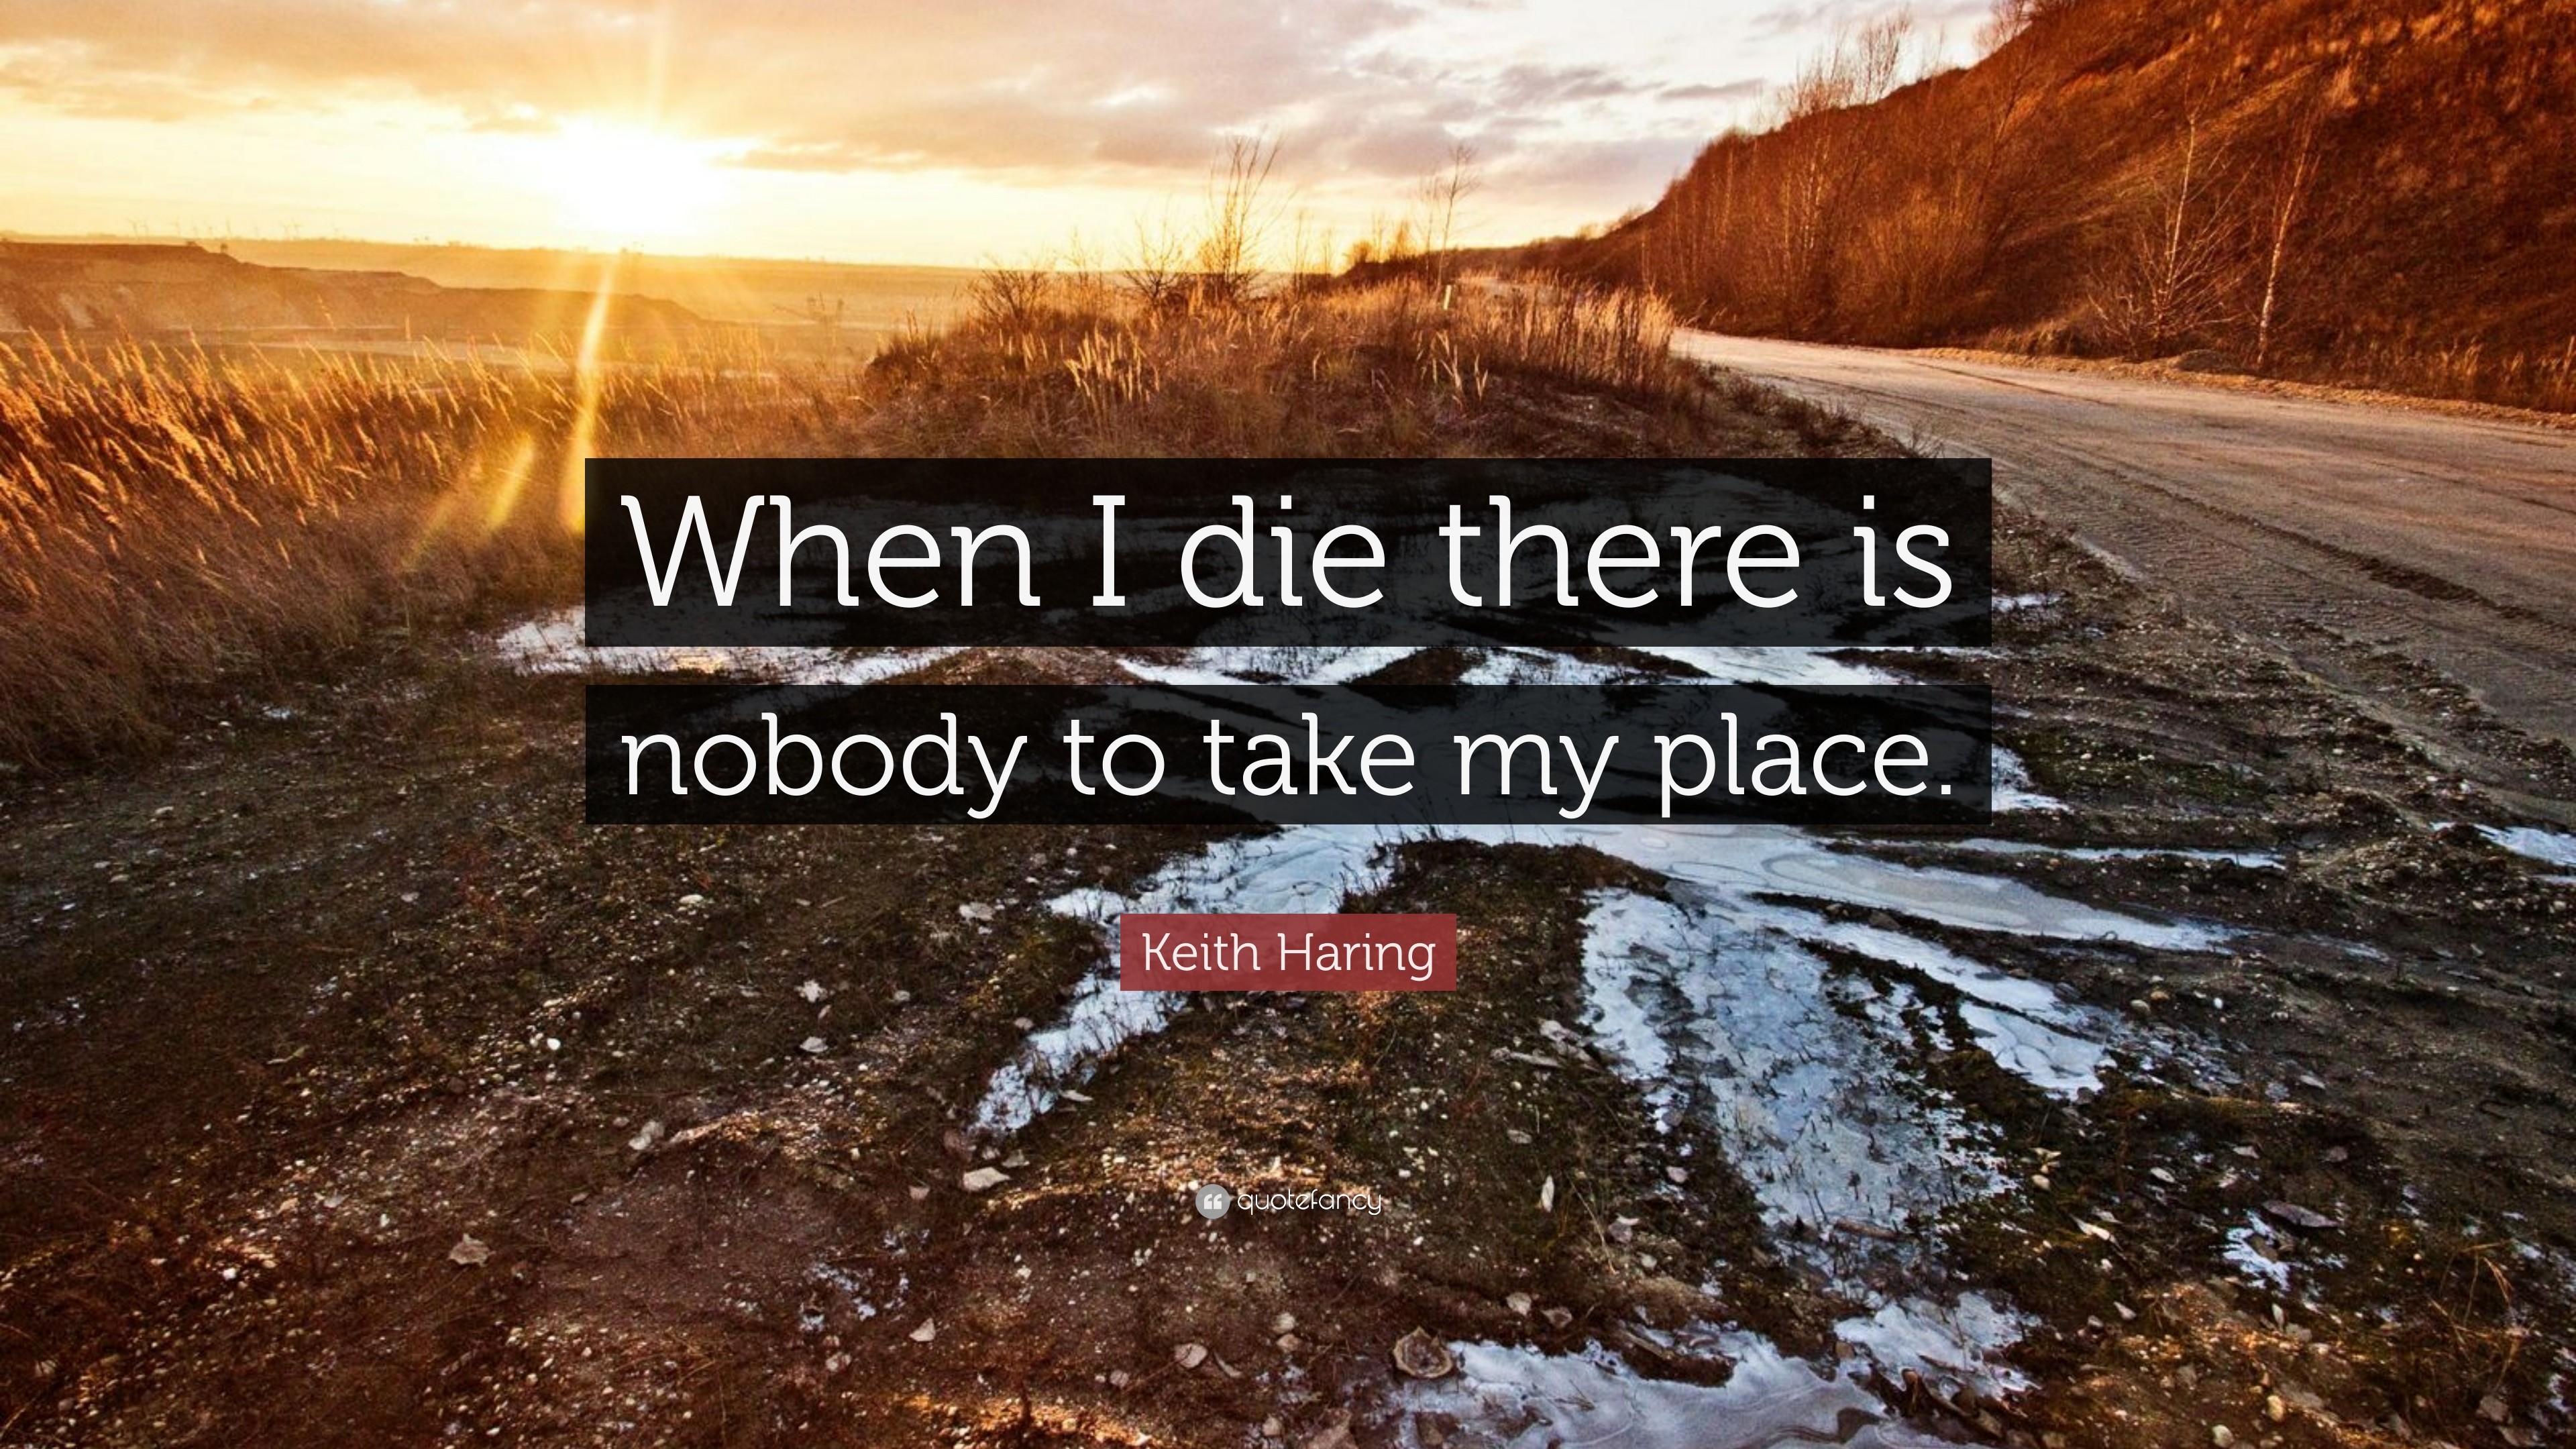 3840x2160 Keith Haring Quote: “When I die there is nobody to take my place.